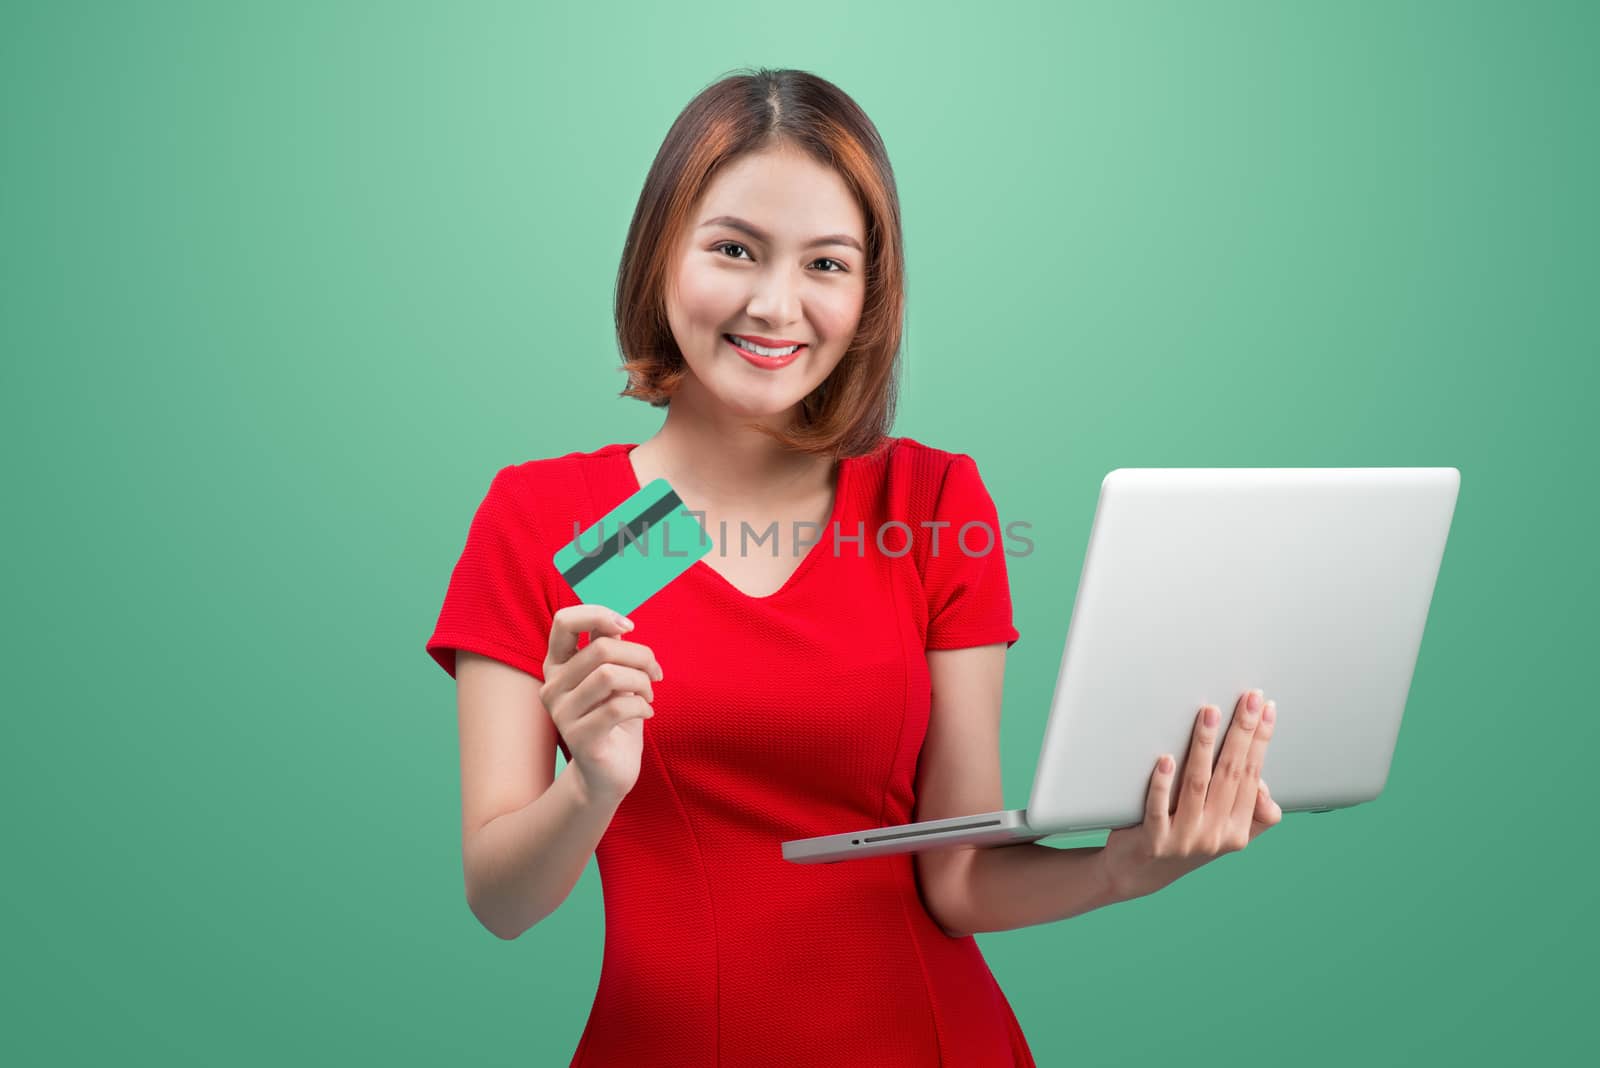 Online shopping. Asian woman holding laptop and credit card ready to pay.